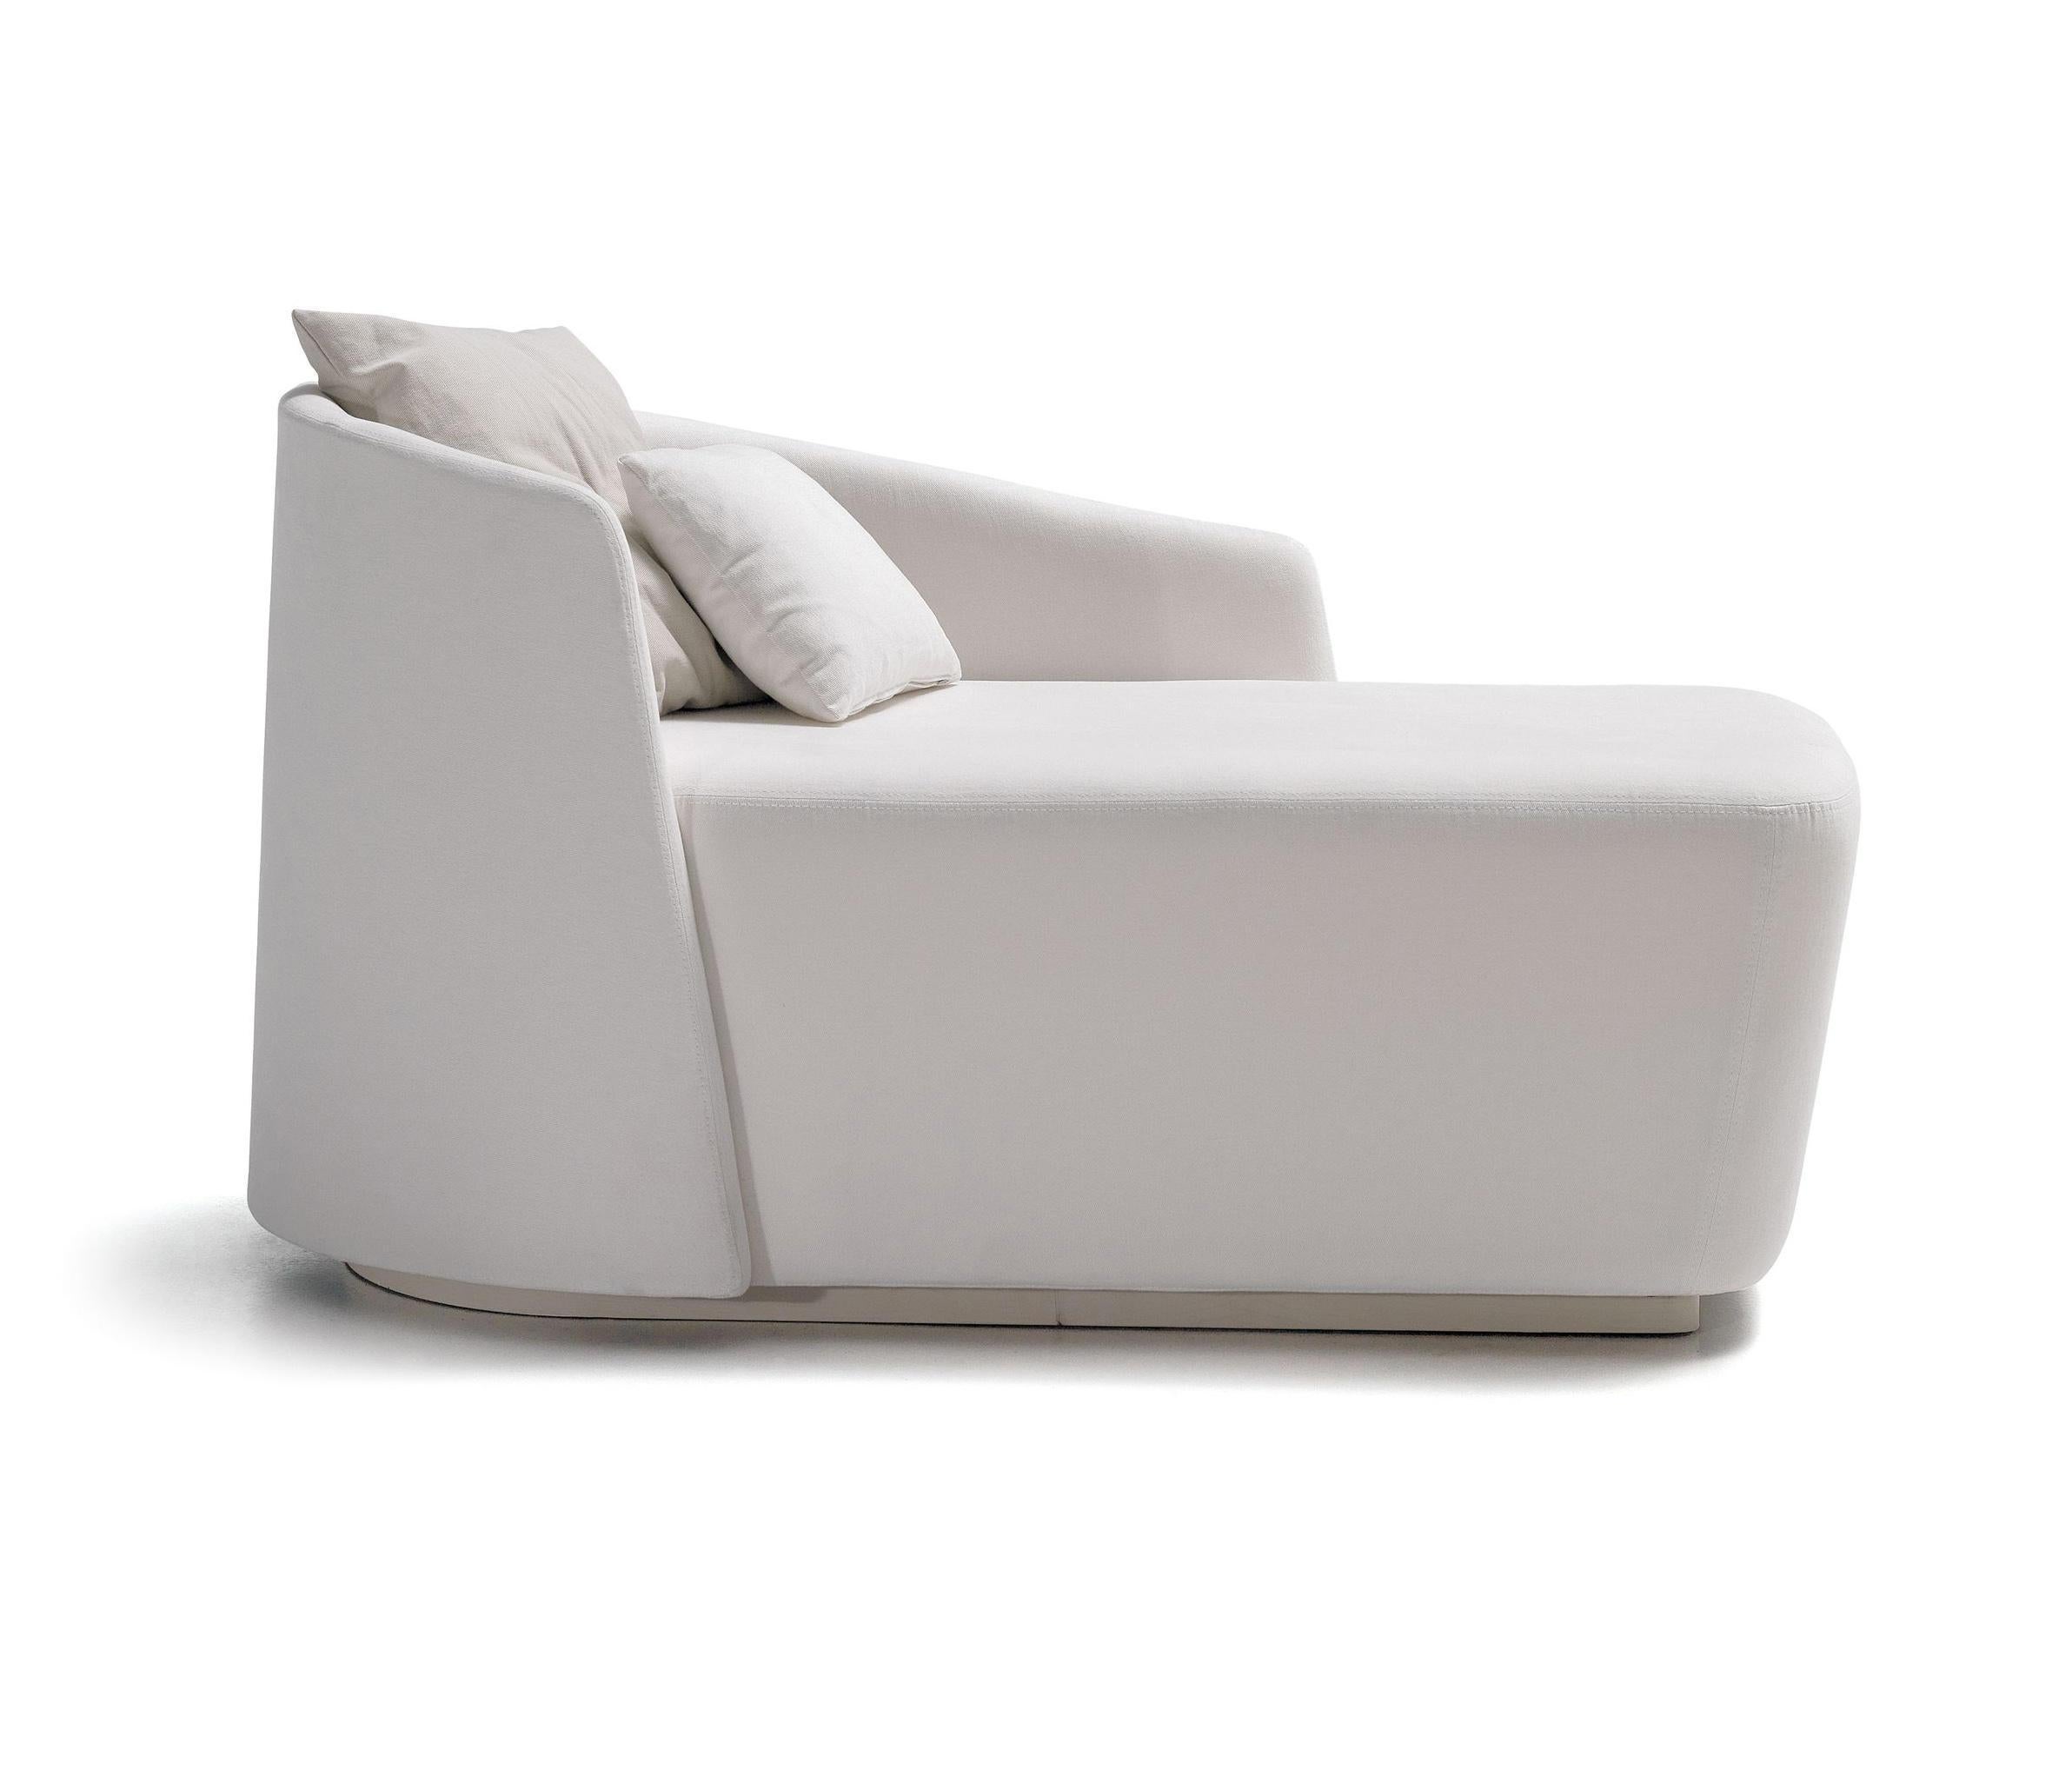 Modern Supernatural Chaise Lounge Sofa Chair by Jorge Pensi For Sale